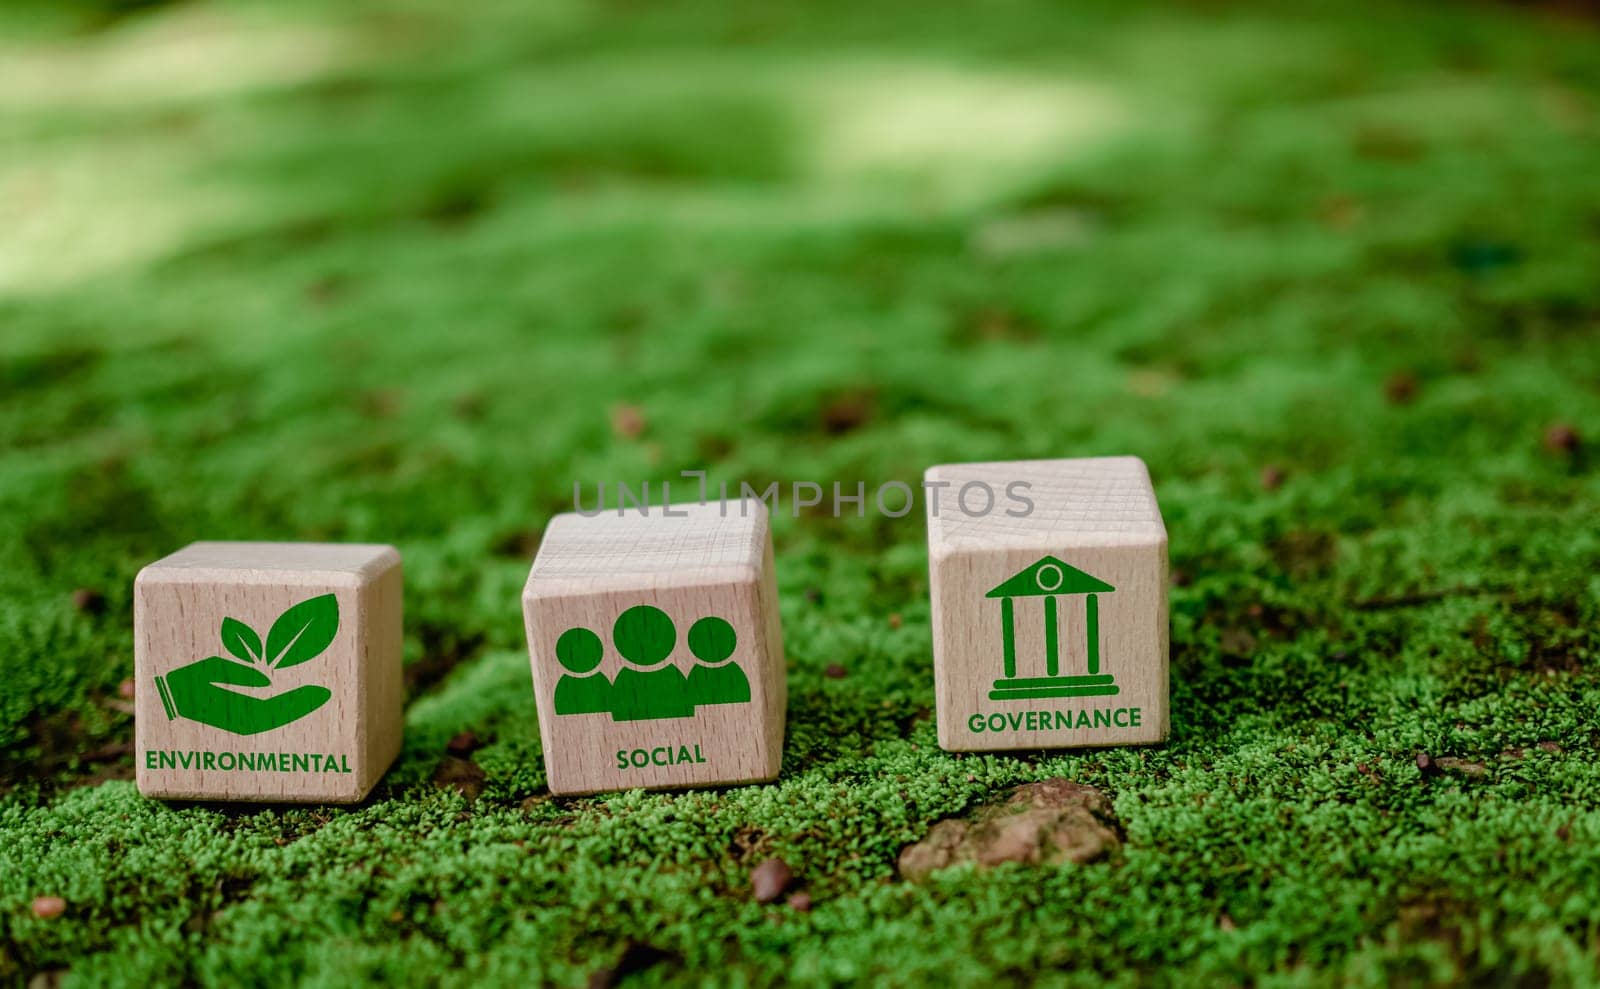 ESG concept for environment, society and governance in sustainable. business responsible environmental. by Unimages2527